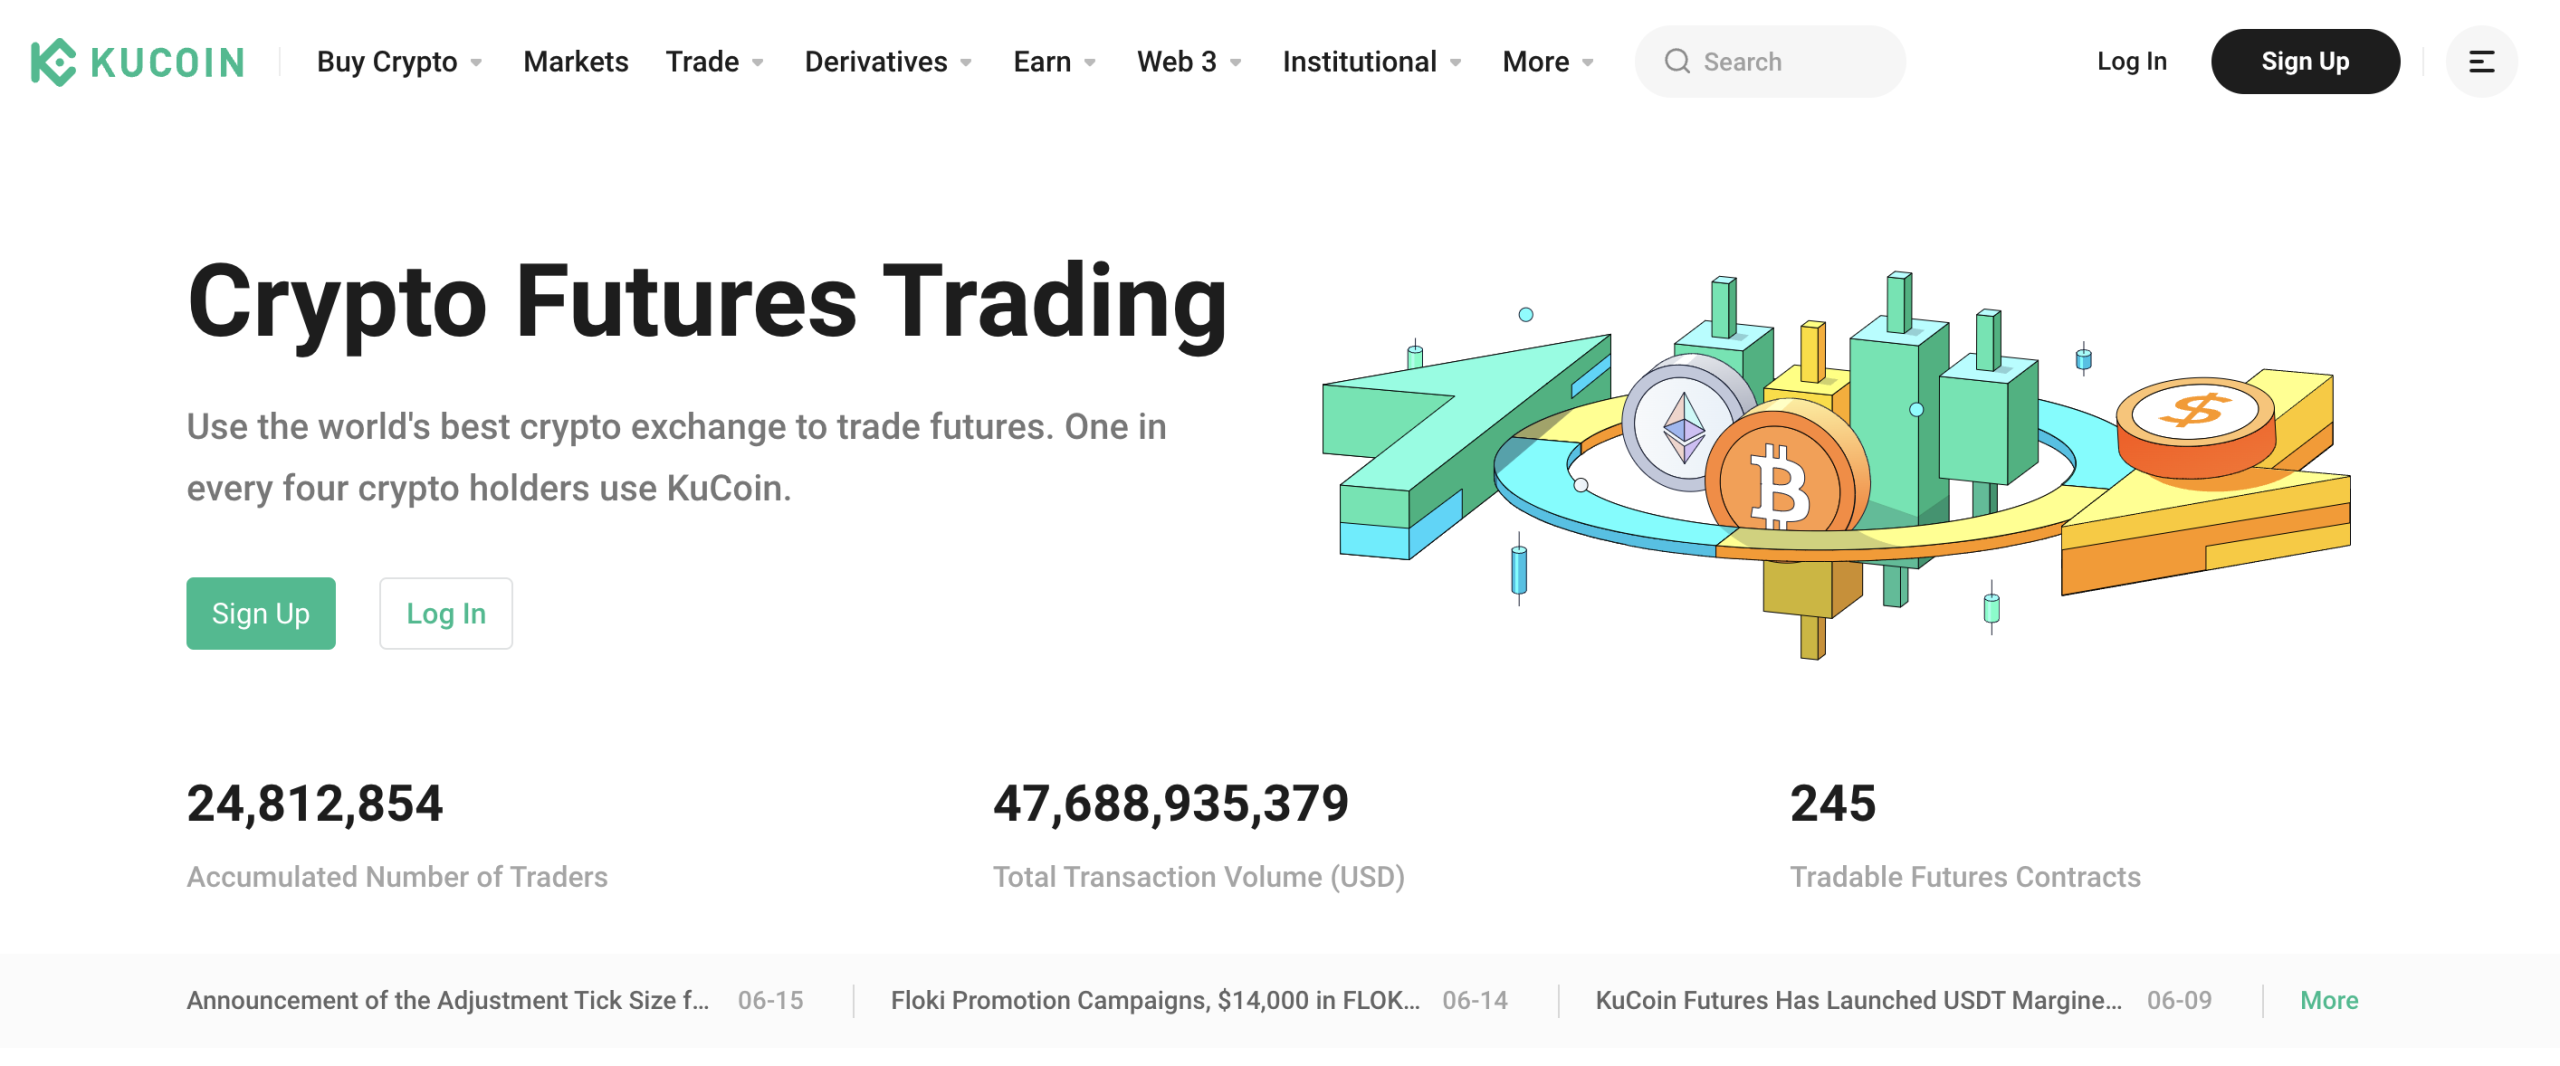 KuCoin futures trading review